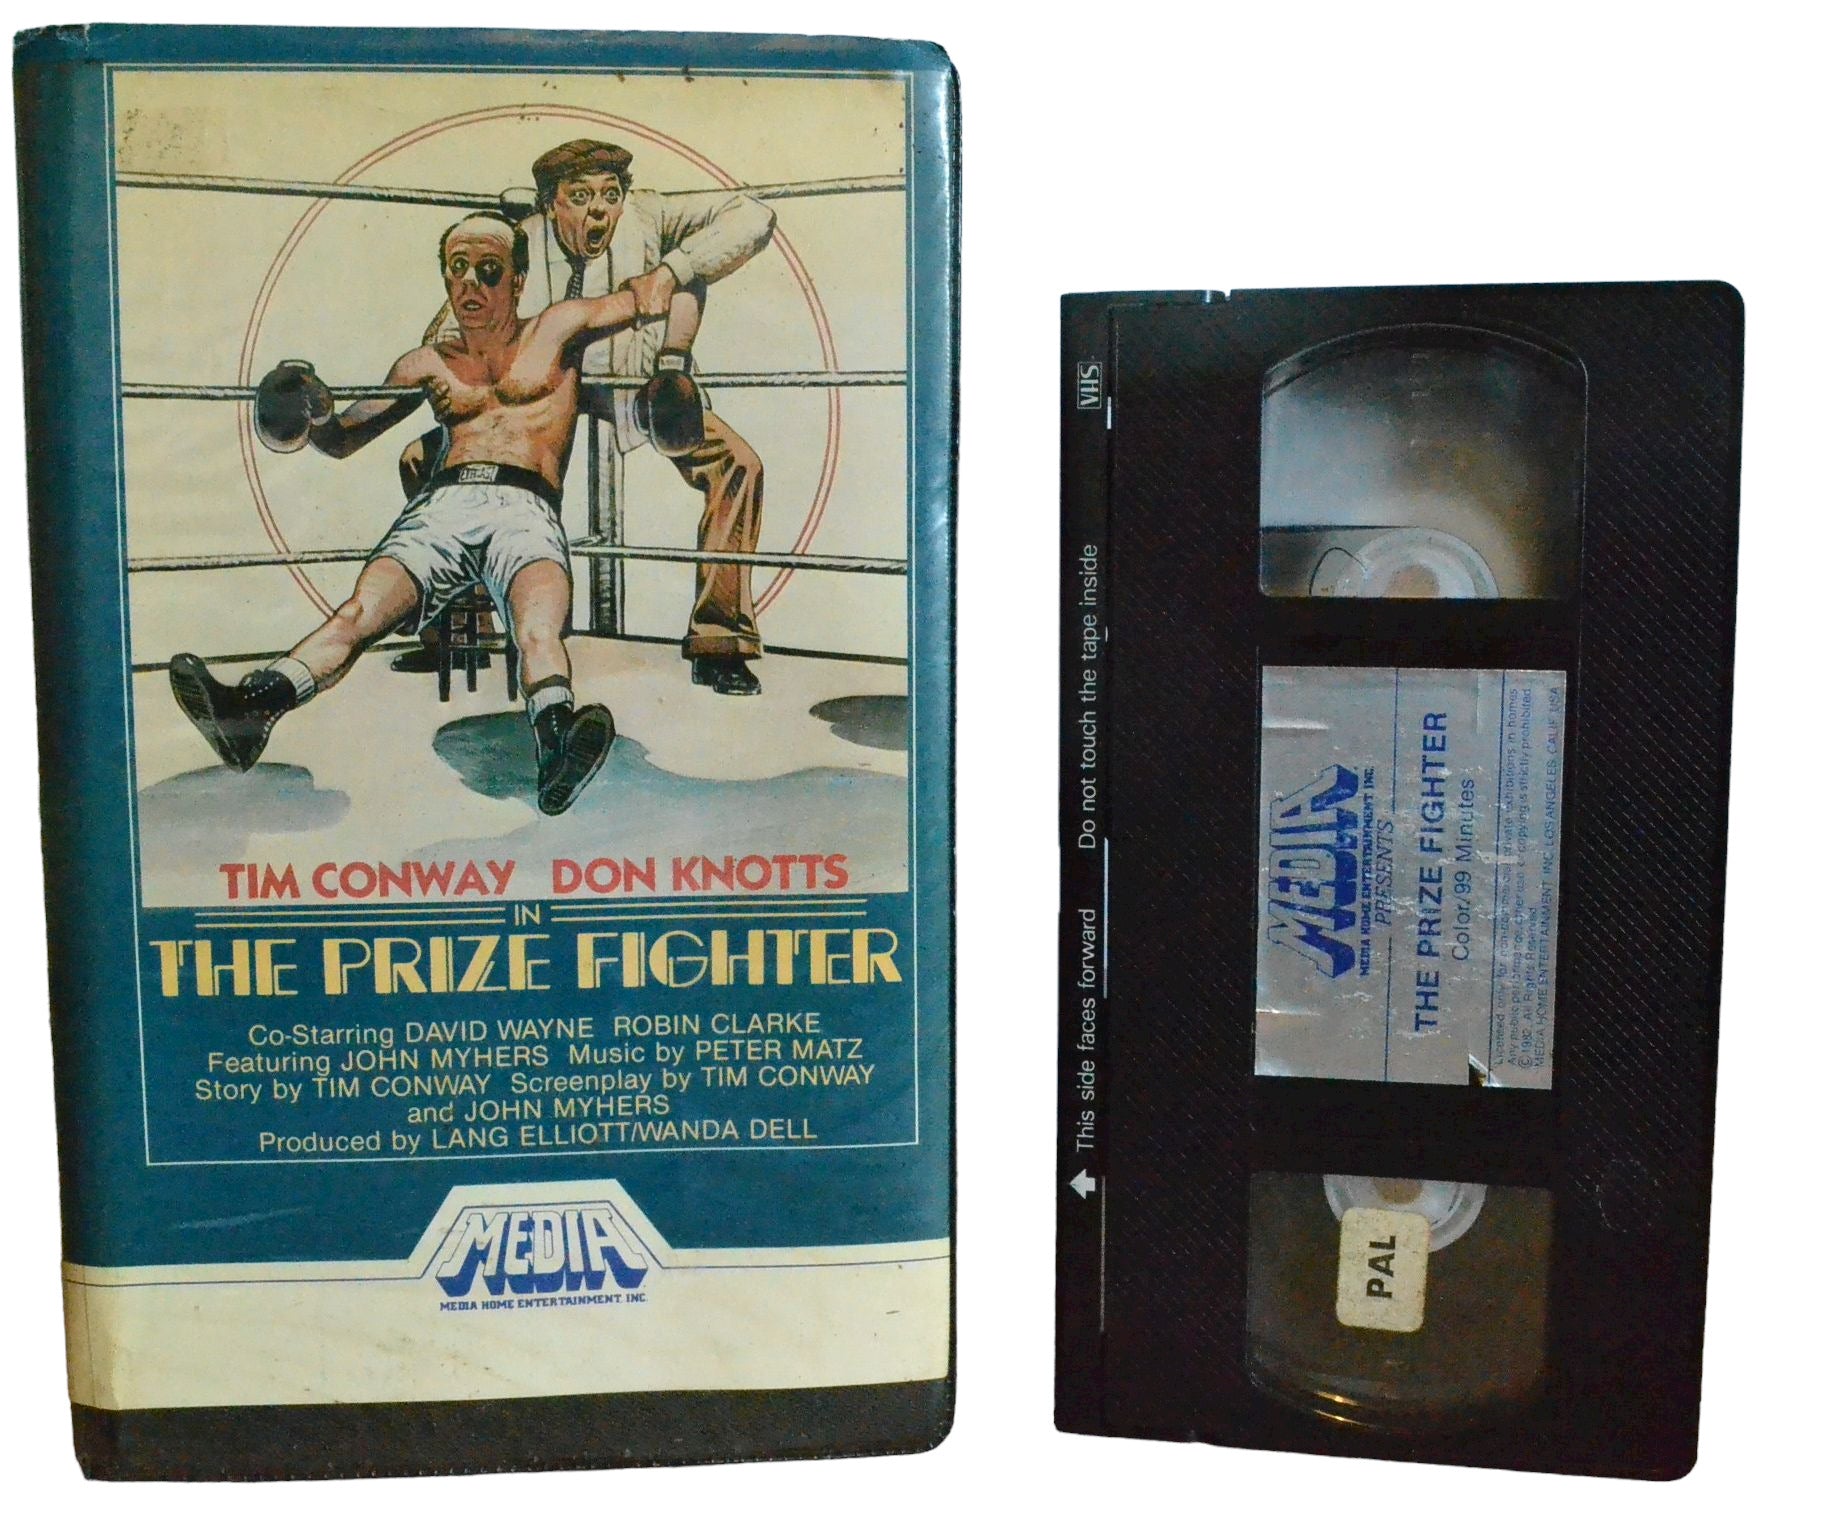 Tim Conway Don Knotts In The Prize Fighter - Tim Conway - Media HOme Entertainment INC - Large Box - PAL - VHS-